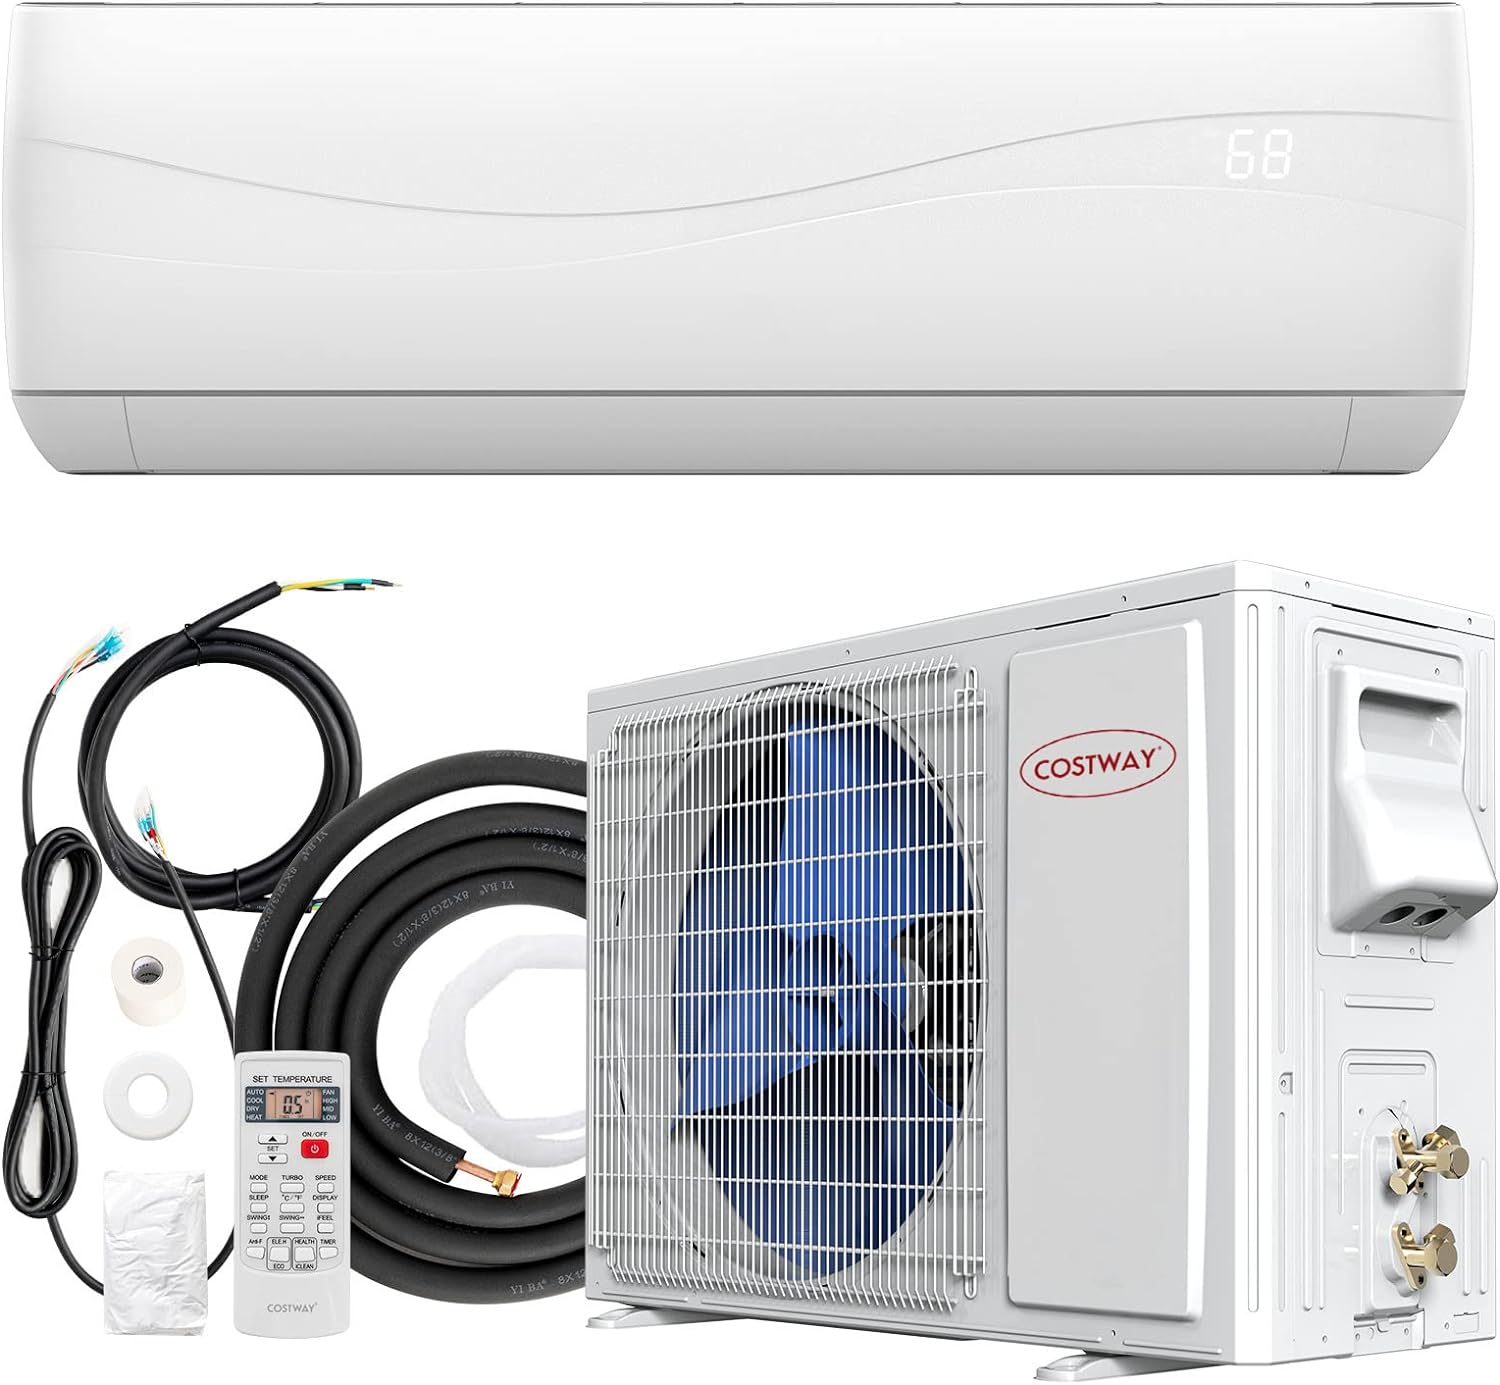 COSTWAY 23000BTU Mini Split Air Conditioner& Heater,18.5 SEER2 208-230V Wall-Mounted Ductless AC Unit Cools Rooms up to 1500 Sq. Ft, Energy Efficient Inverter AC w/Heat Pump & Installation Kit